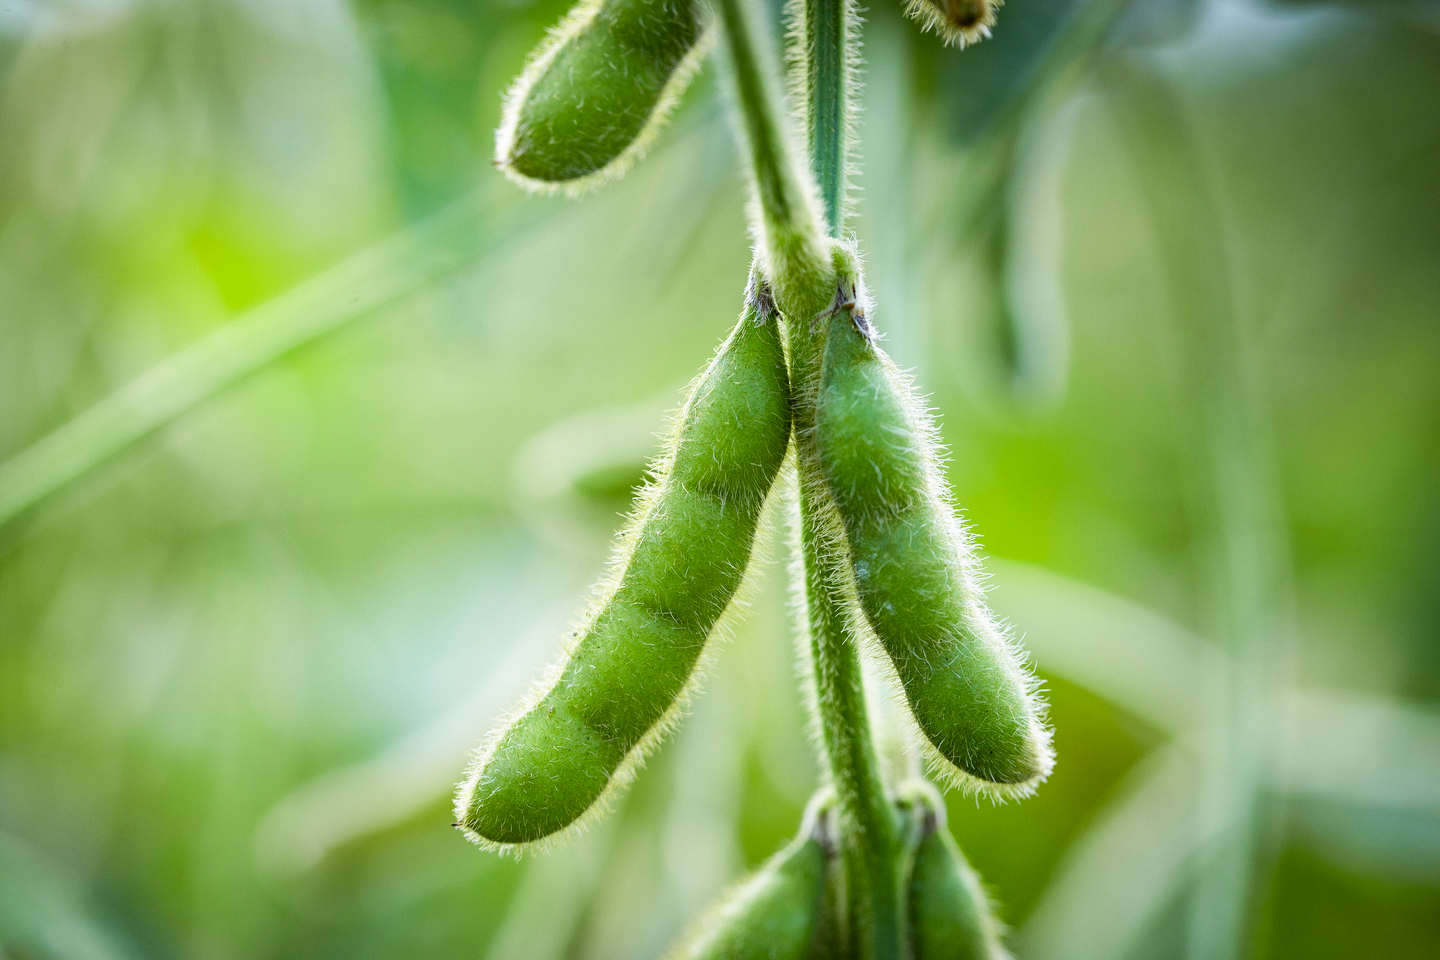 Grown across a wide geography within the United States, Benson Hill’s non-GMO soybean product line combines superior nutritional qualities and oil content with highly competitive yields, offering benefits from seed-to-shelf.